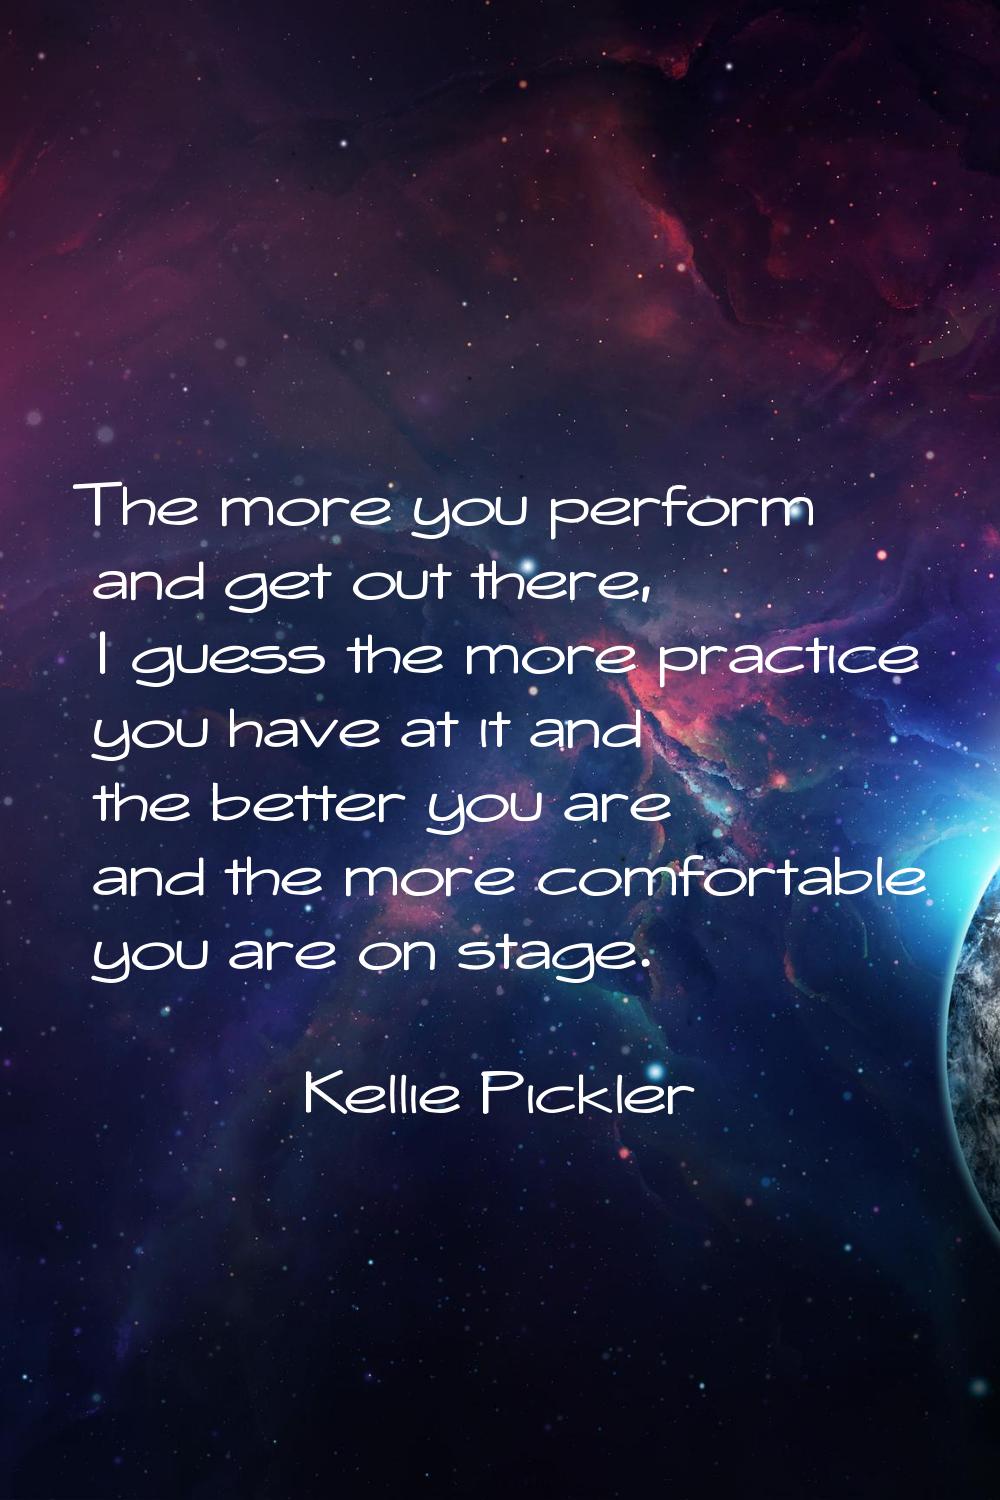 The more you perform and get out there, I guess the more practice you have at it and the better you